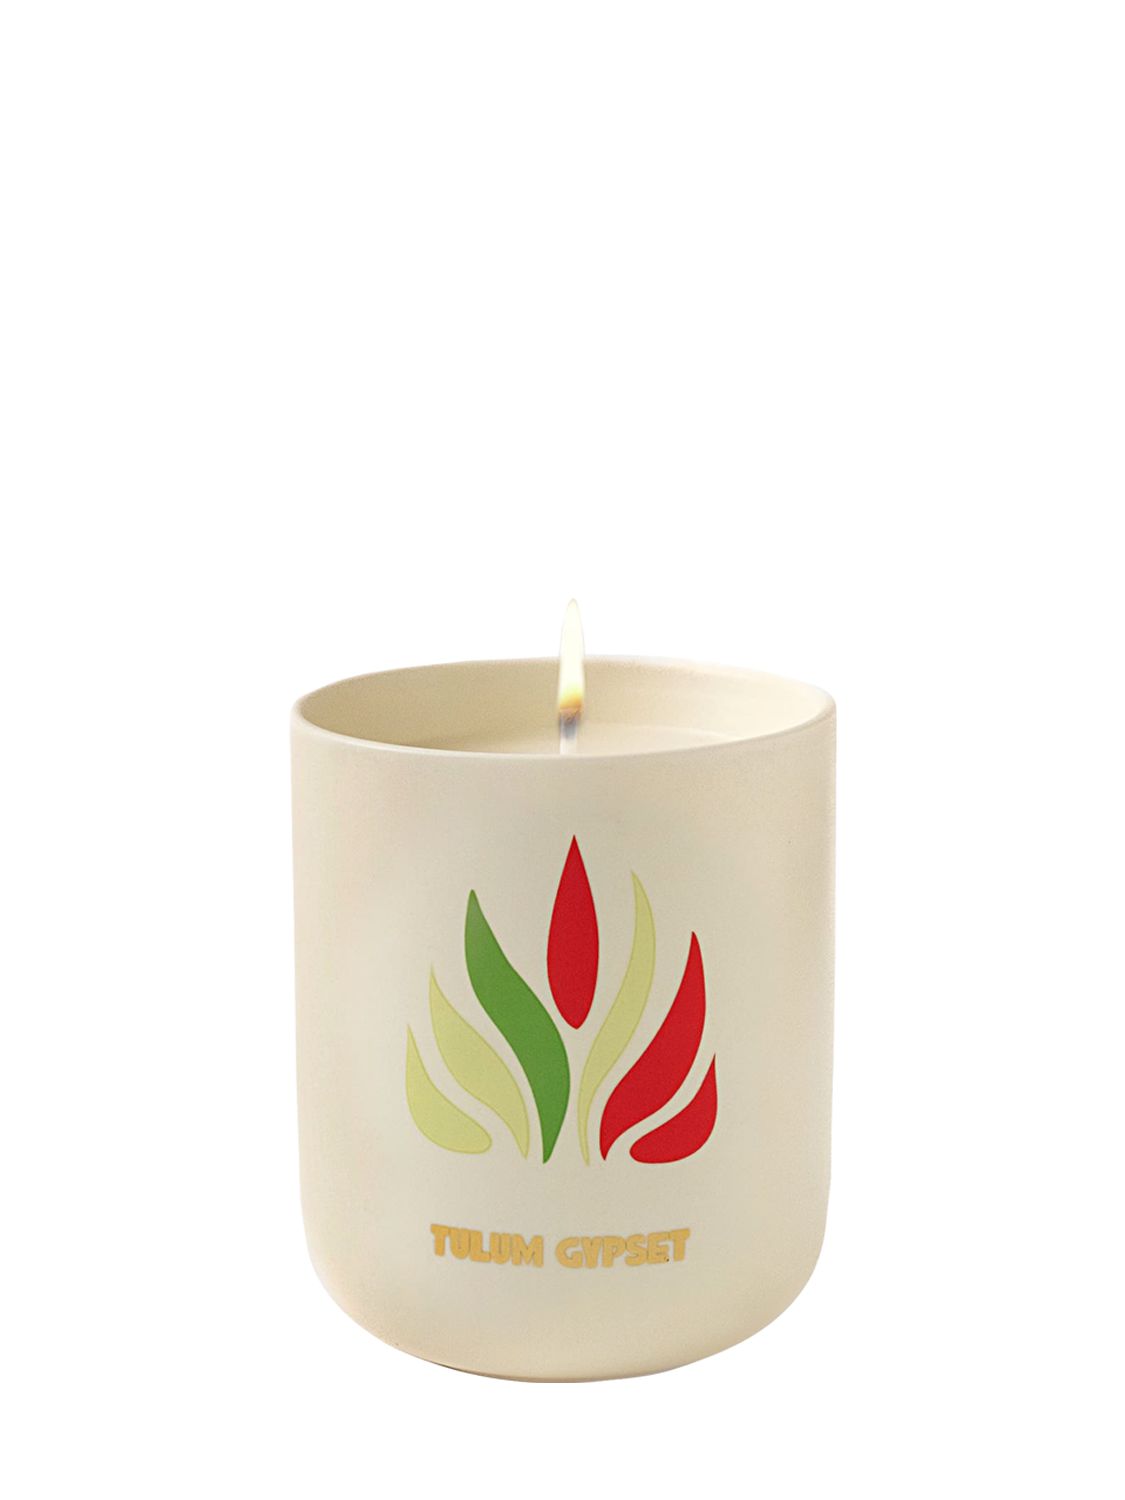 Image of Tulum Gypset Scented Candle